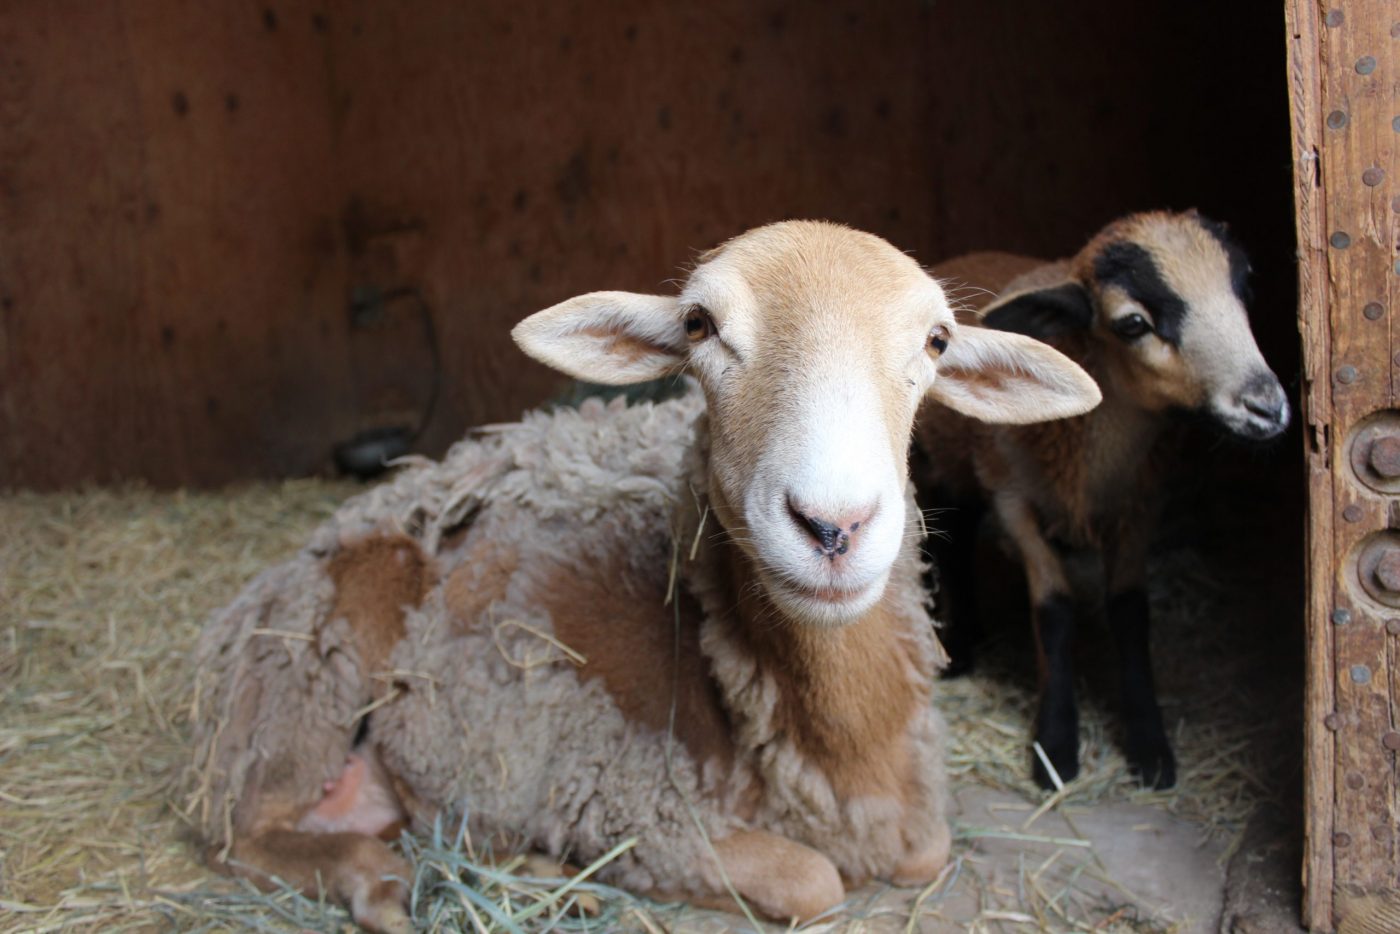 Katie sheep mother and Maple lamb at Farm Sanctuary